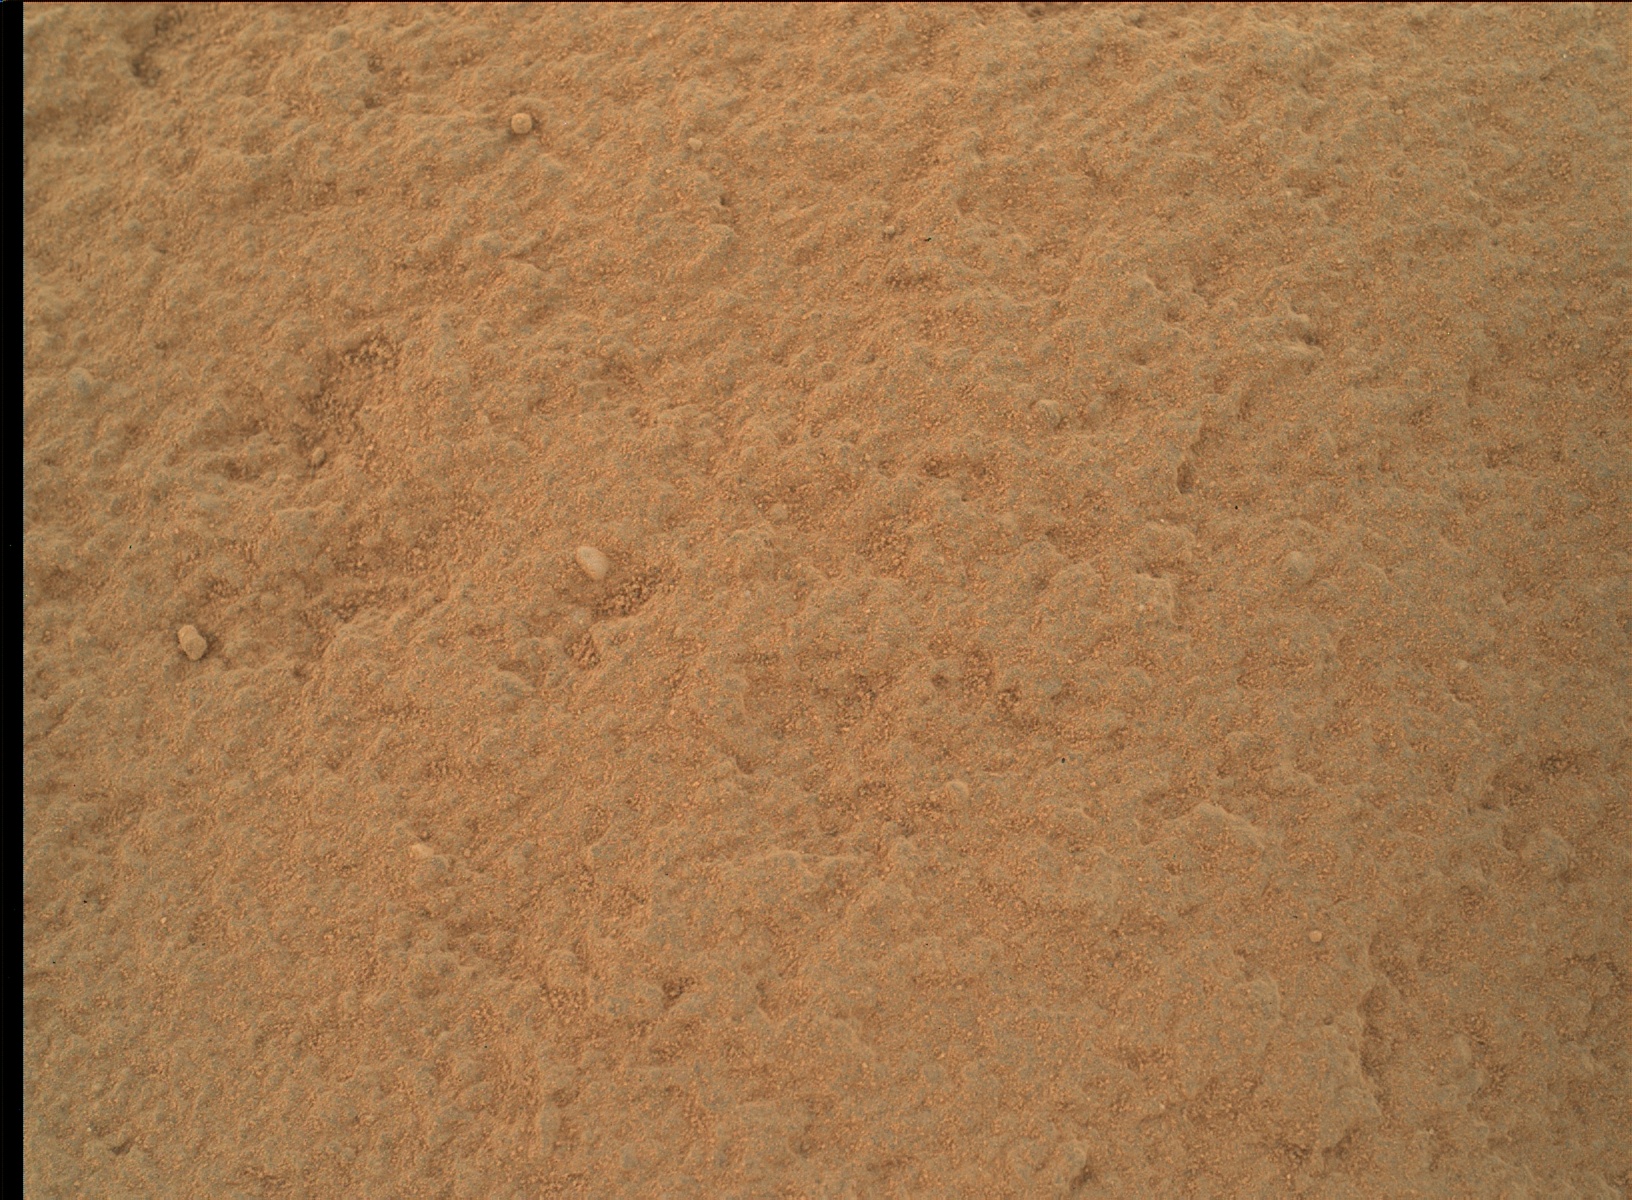 Nasa's Mars rover Curiosity acquired this image using its Mars Hand Lens Imager (MAHLI) on Sol 1089